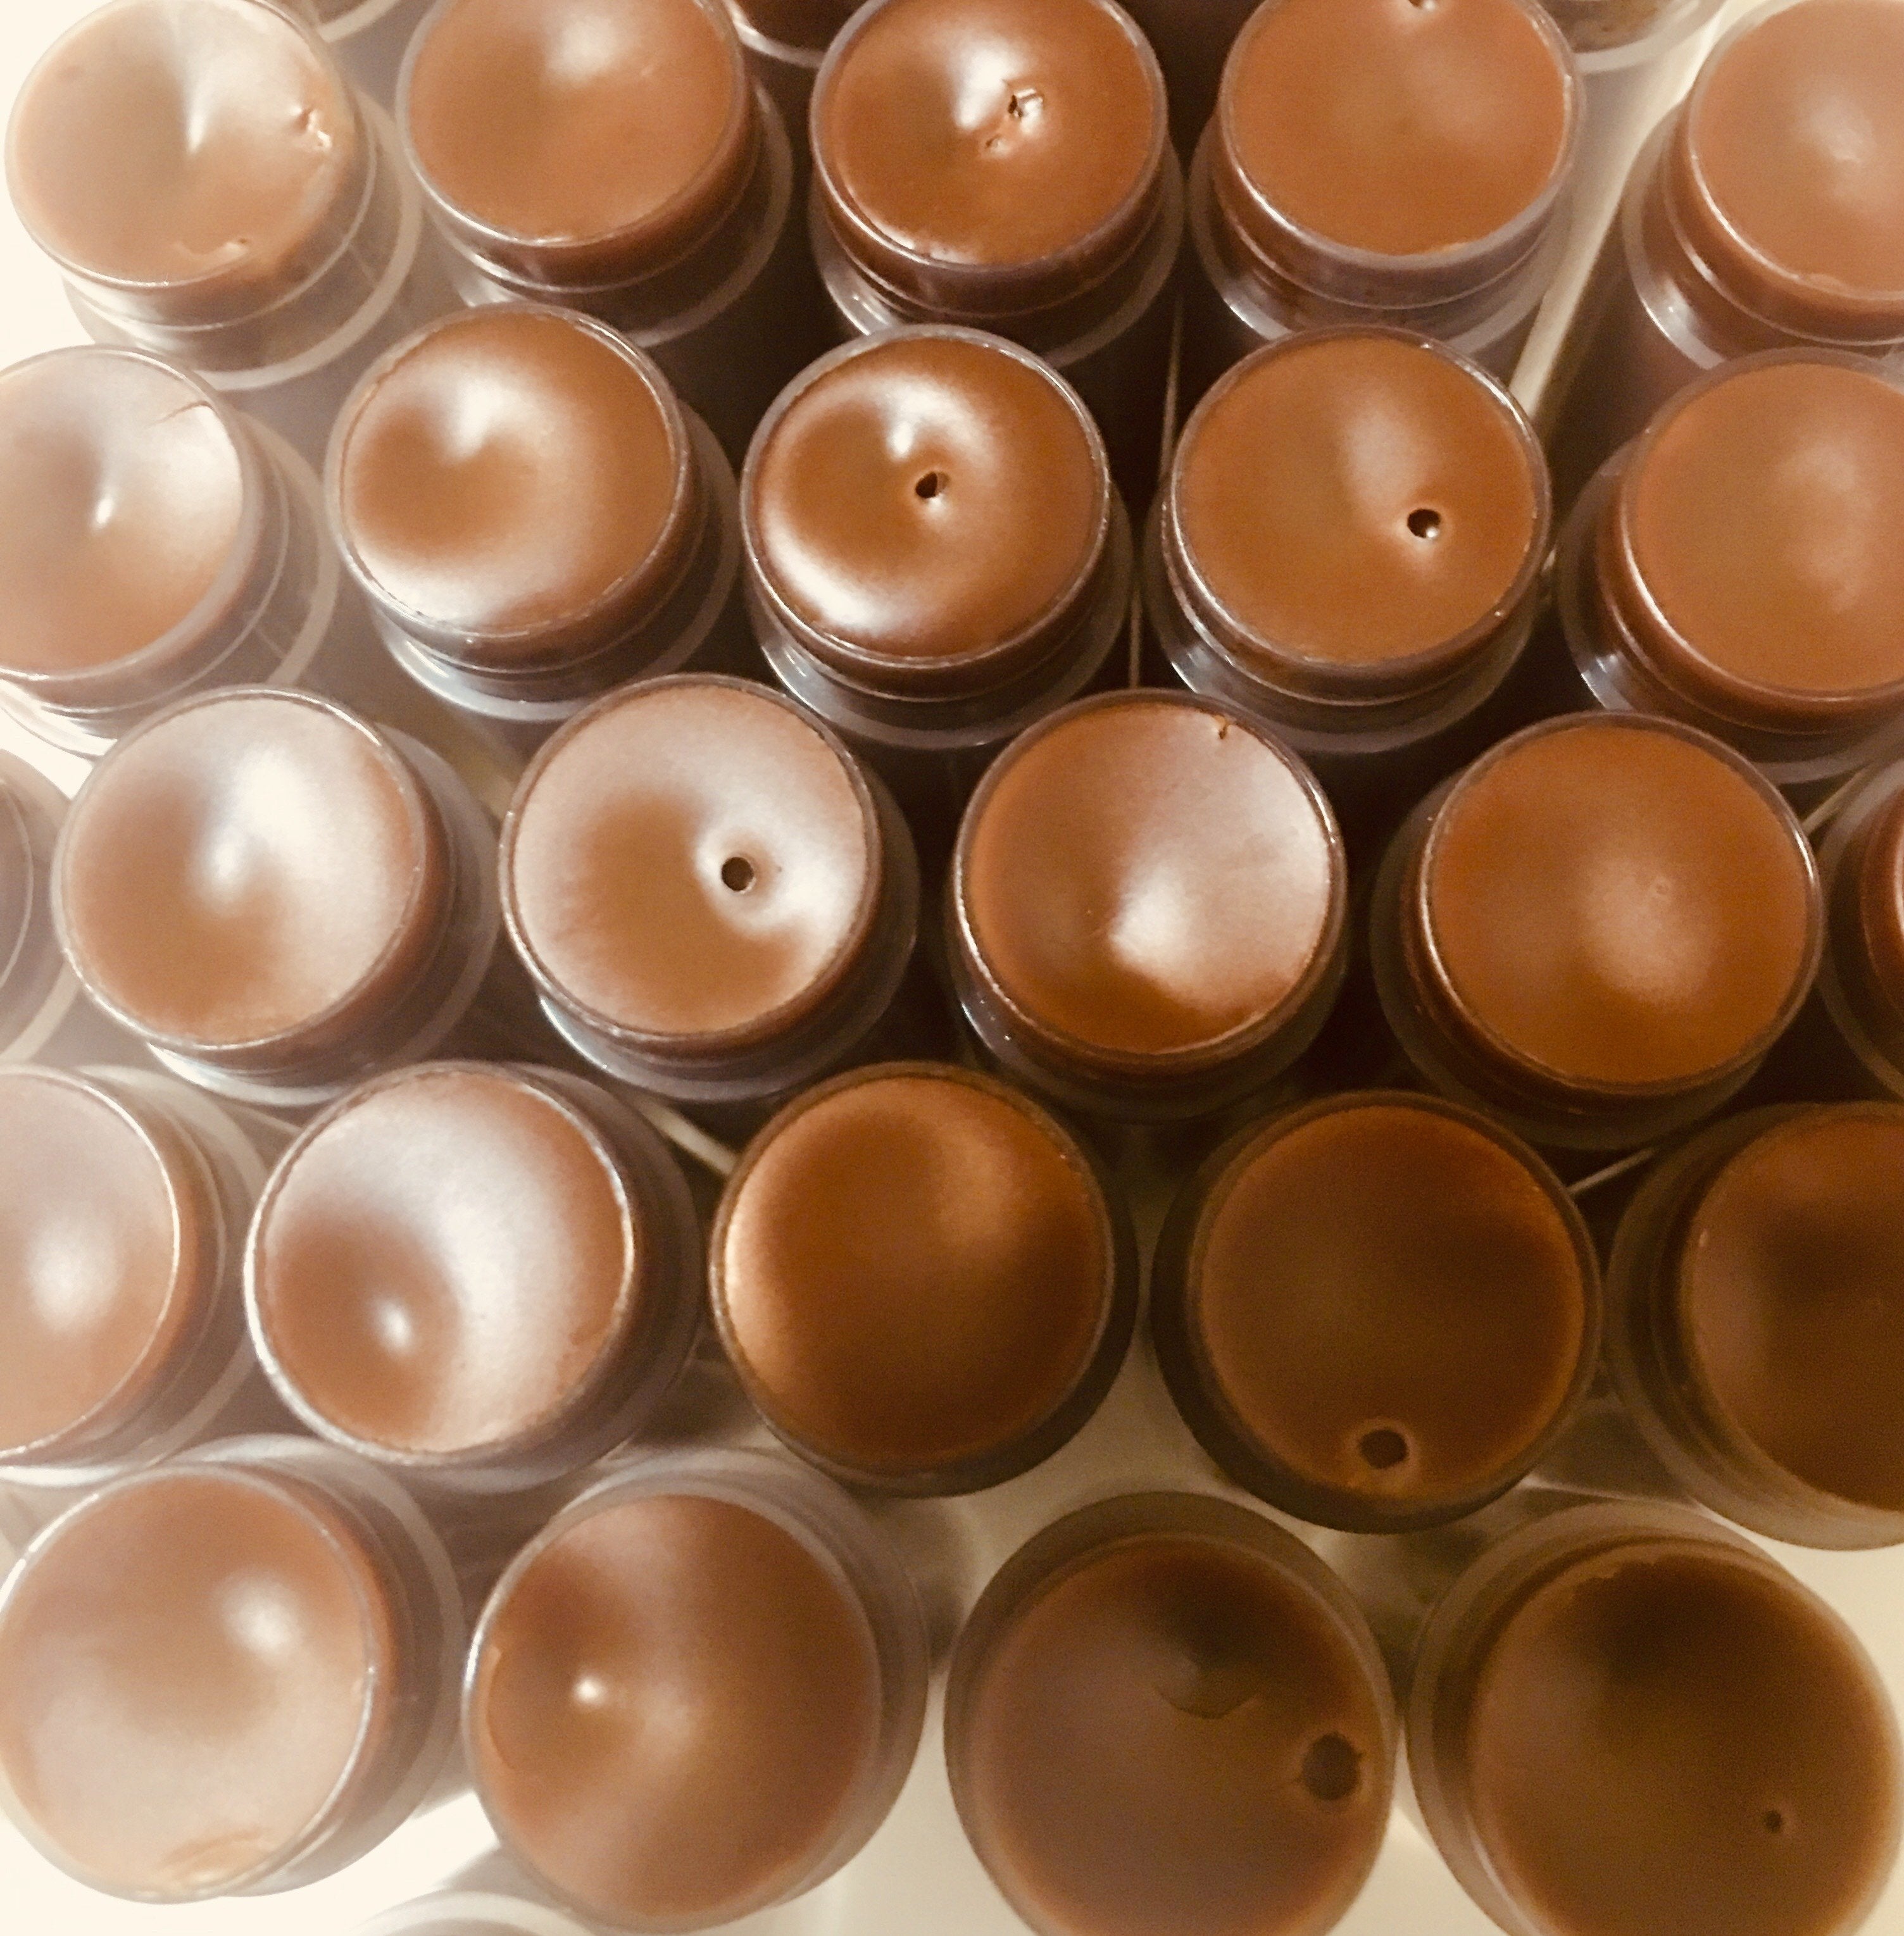 (12) Wholesale Chocolate Lip Butter: Suggested Retail Price $6-$10 each